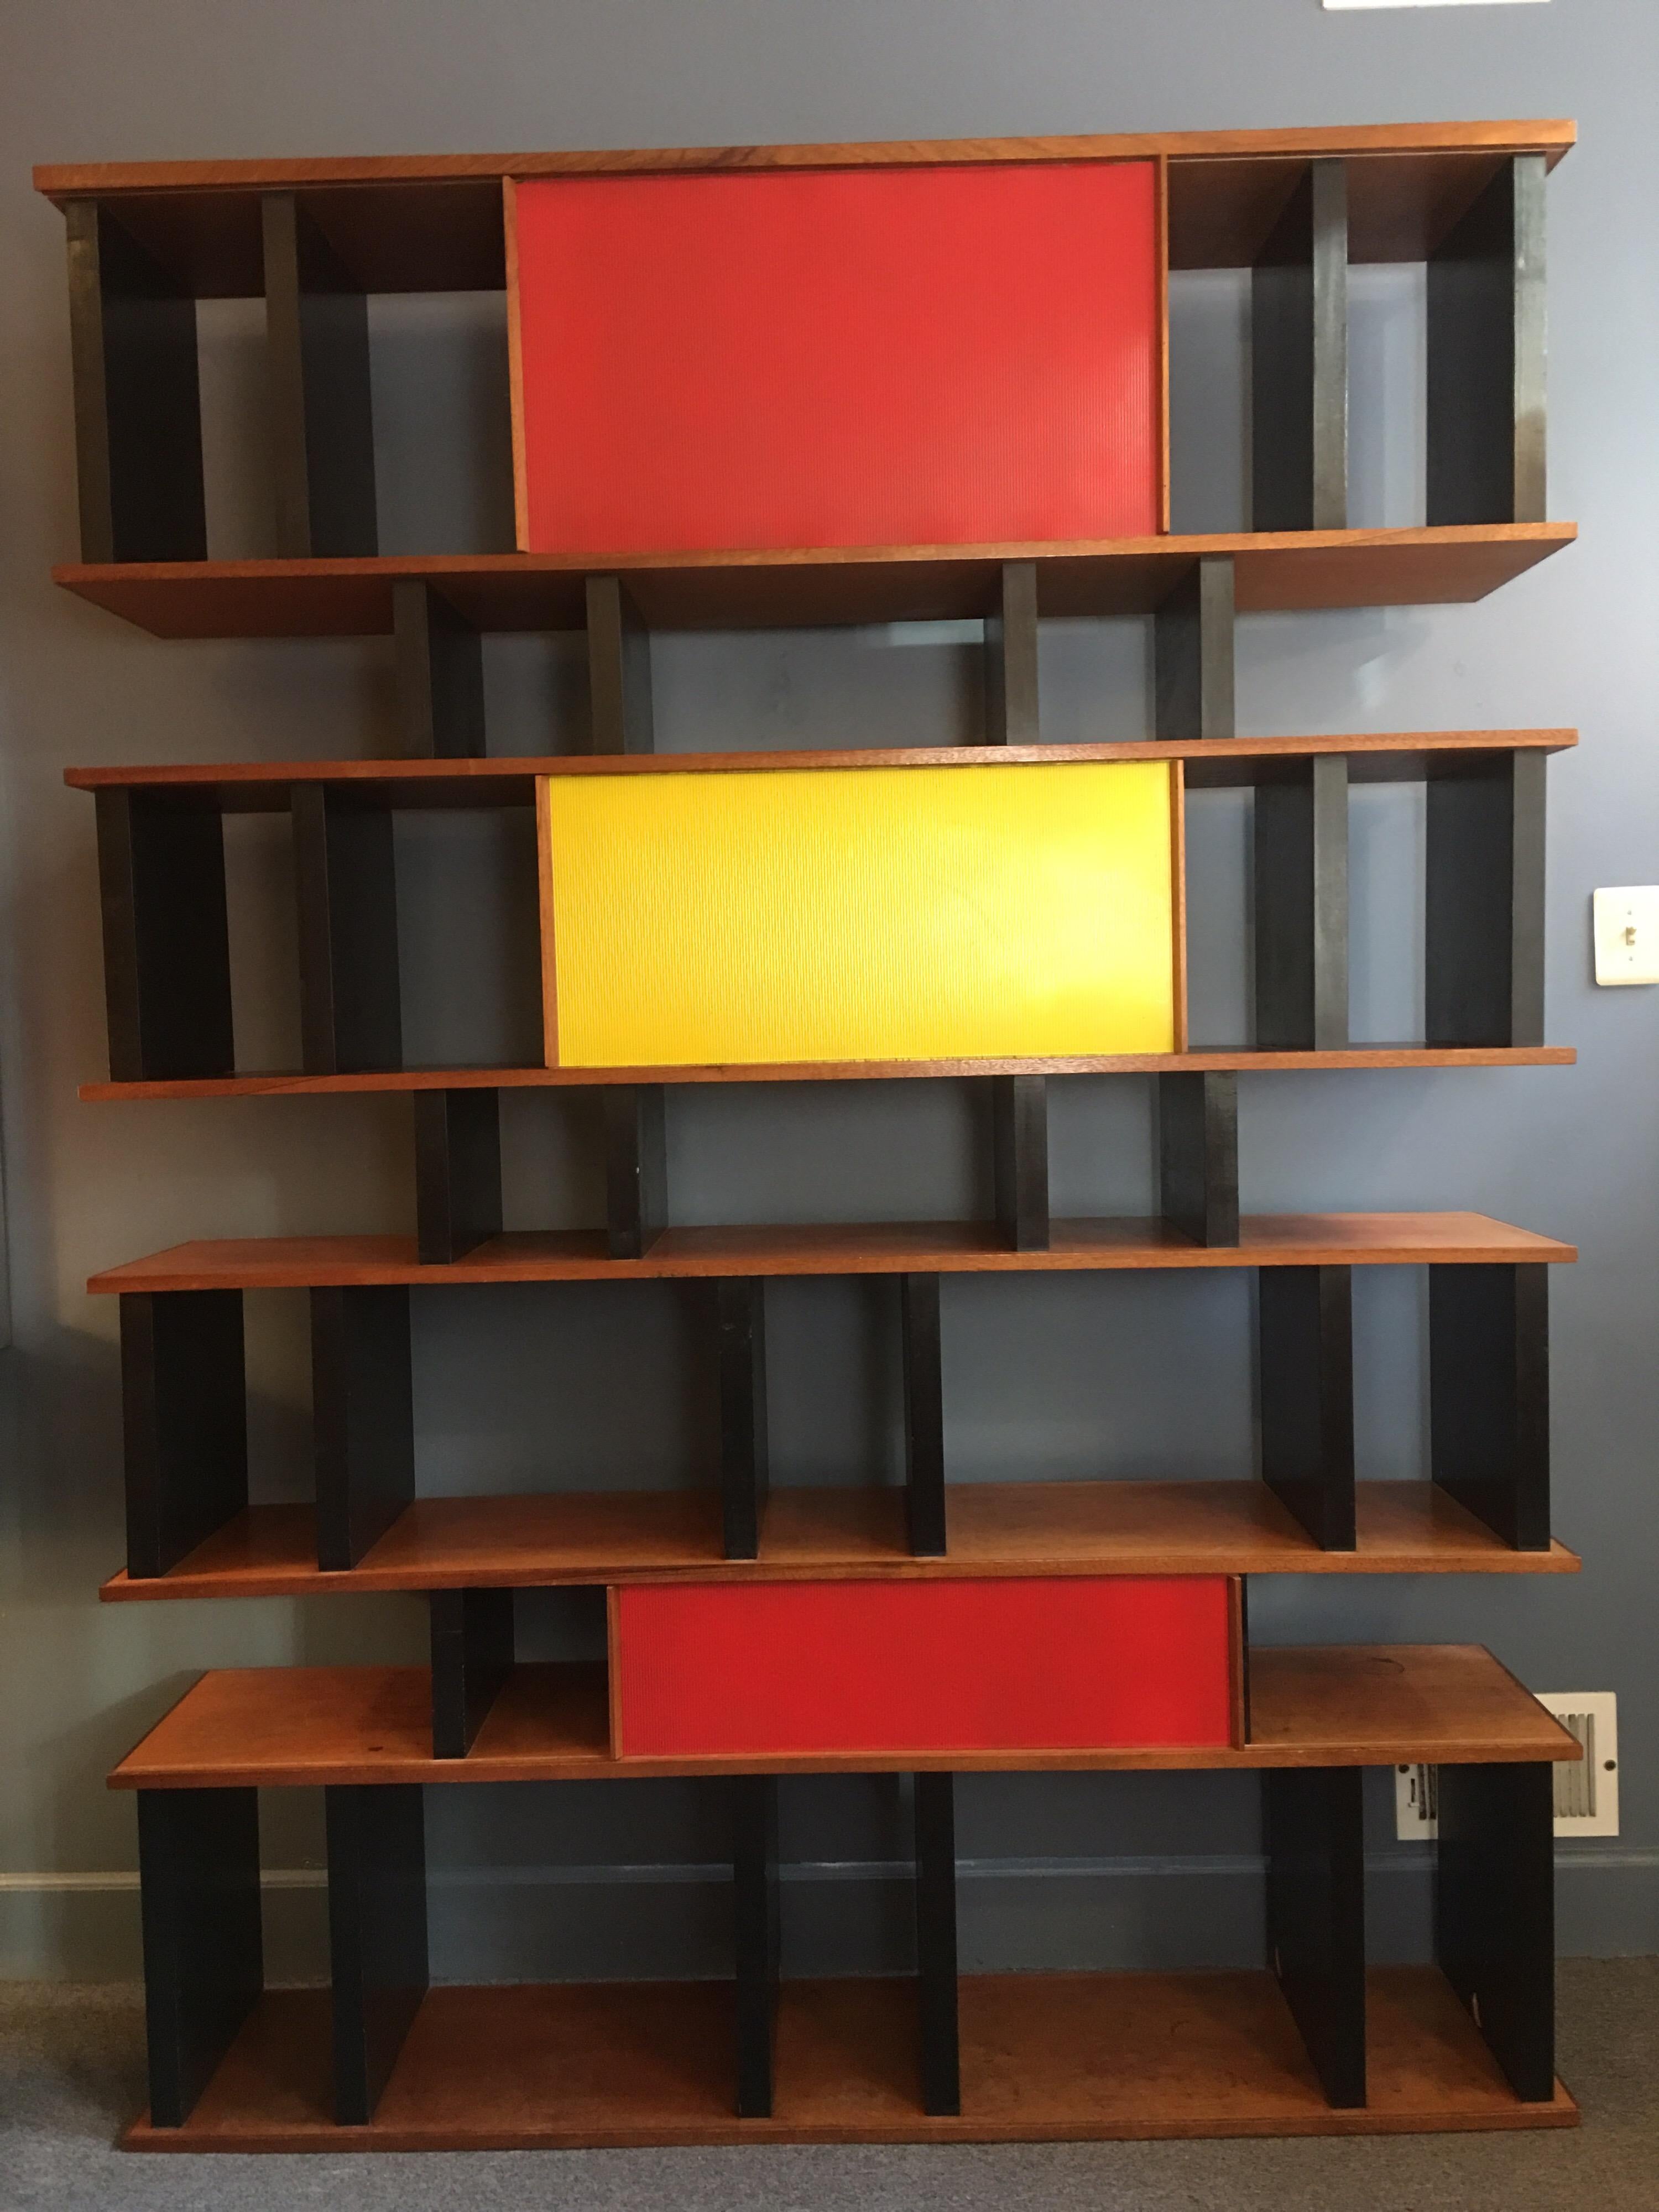 Fiberglass Charlotte Perriand and Jean Prouve Style Shelving System